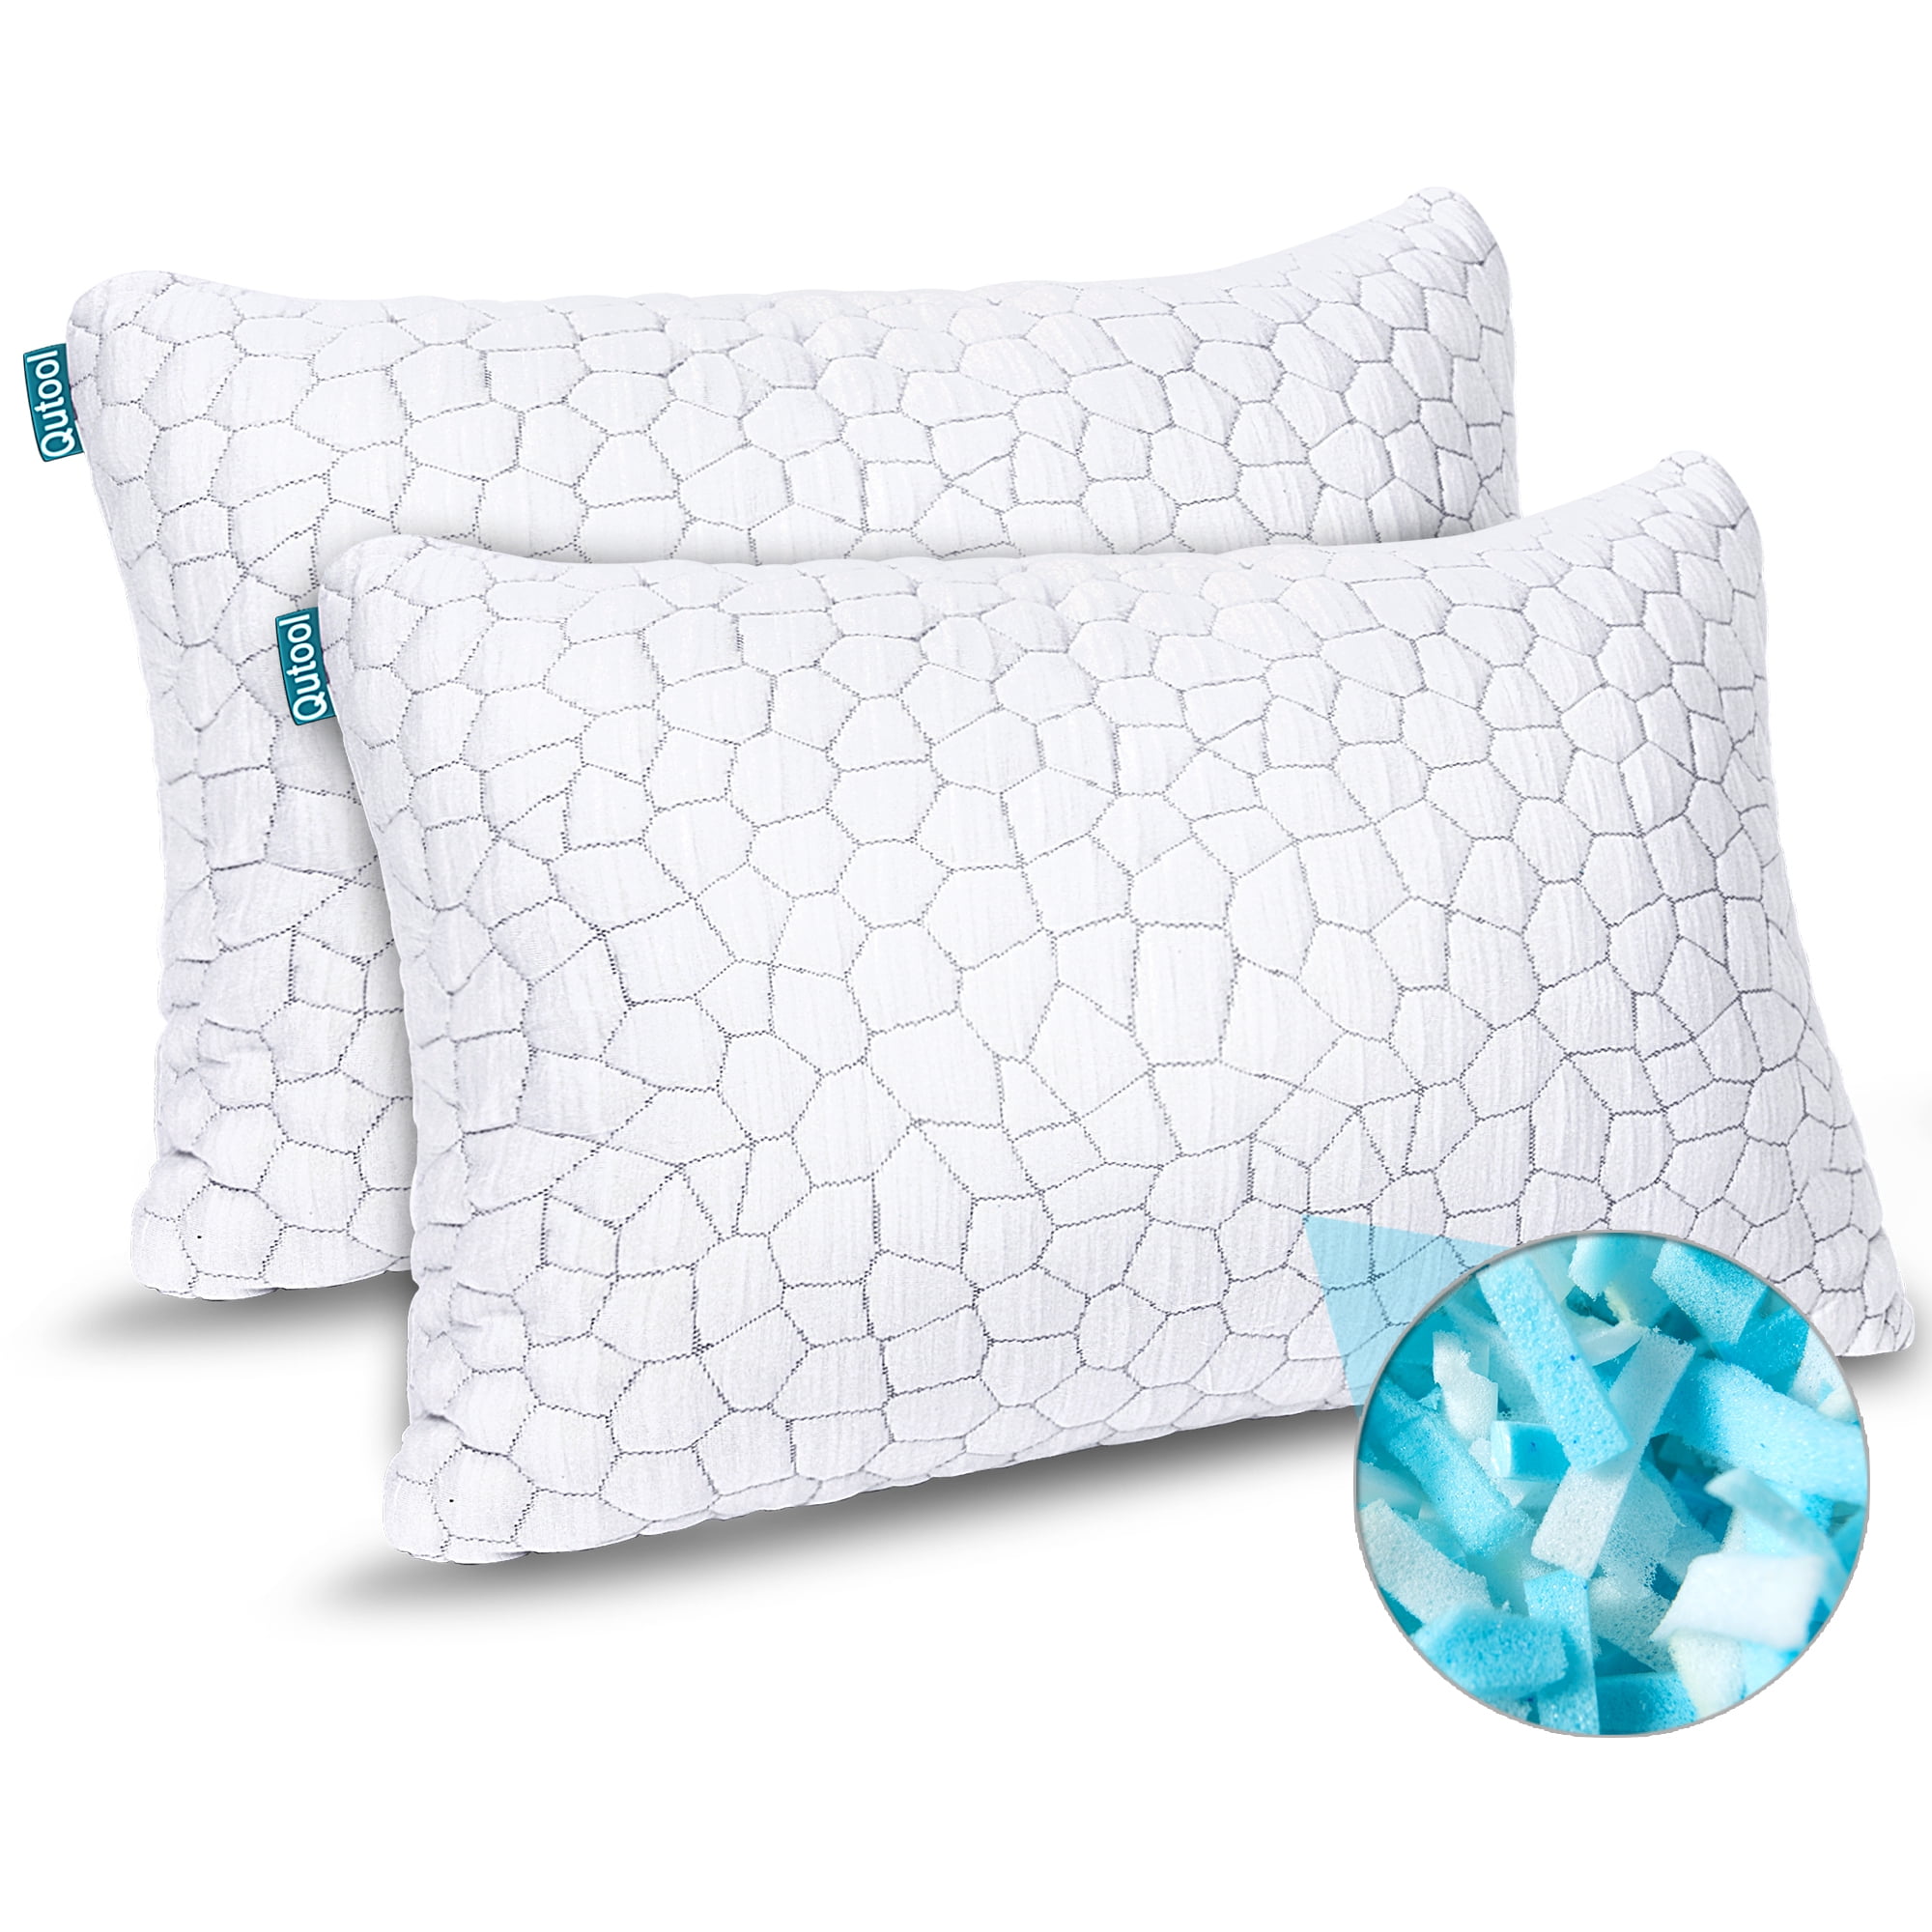 Shoppers Love the Qutool Cooling Pillow